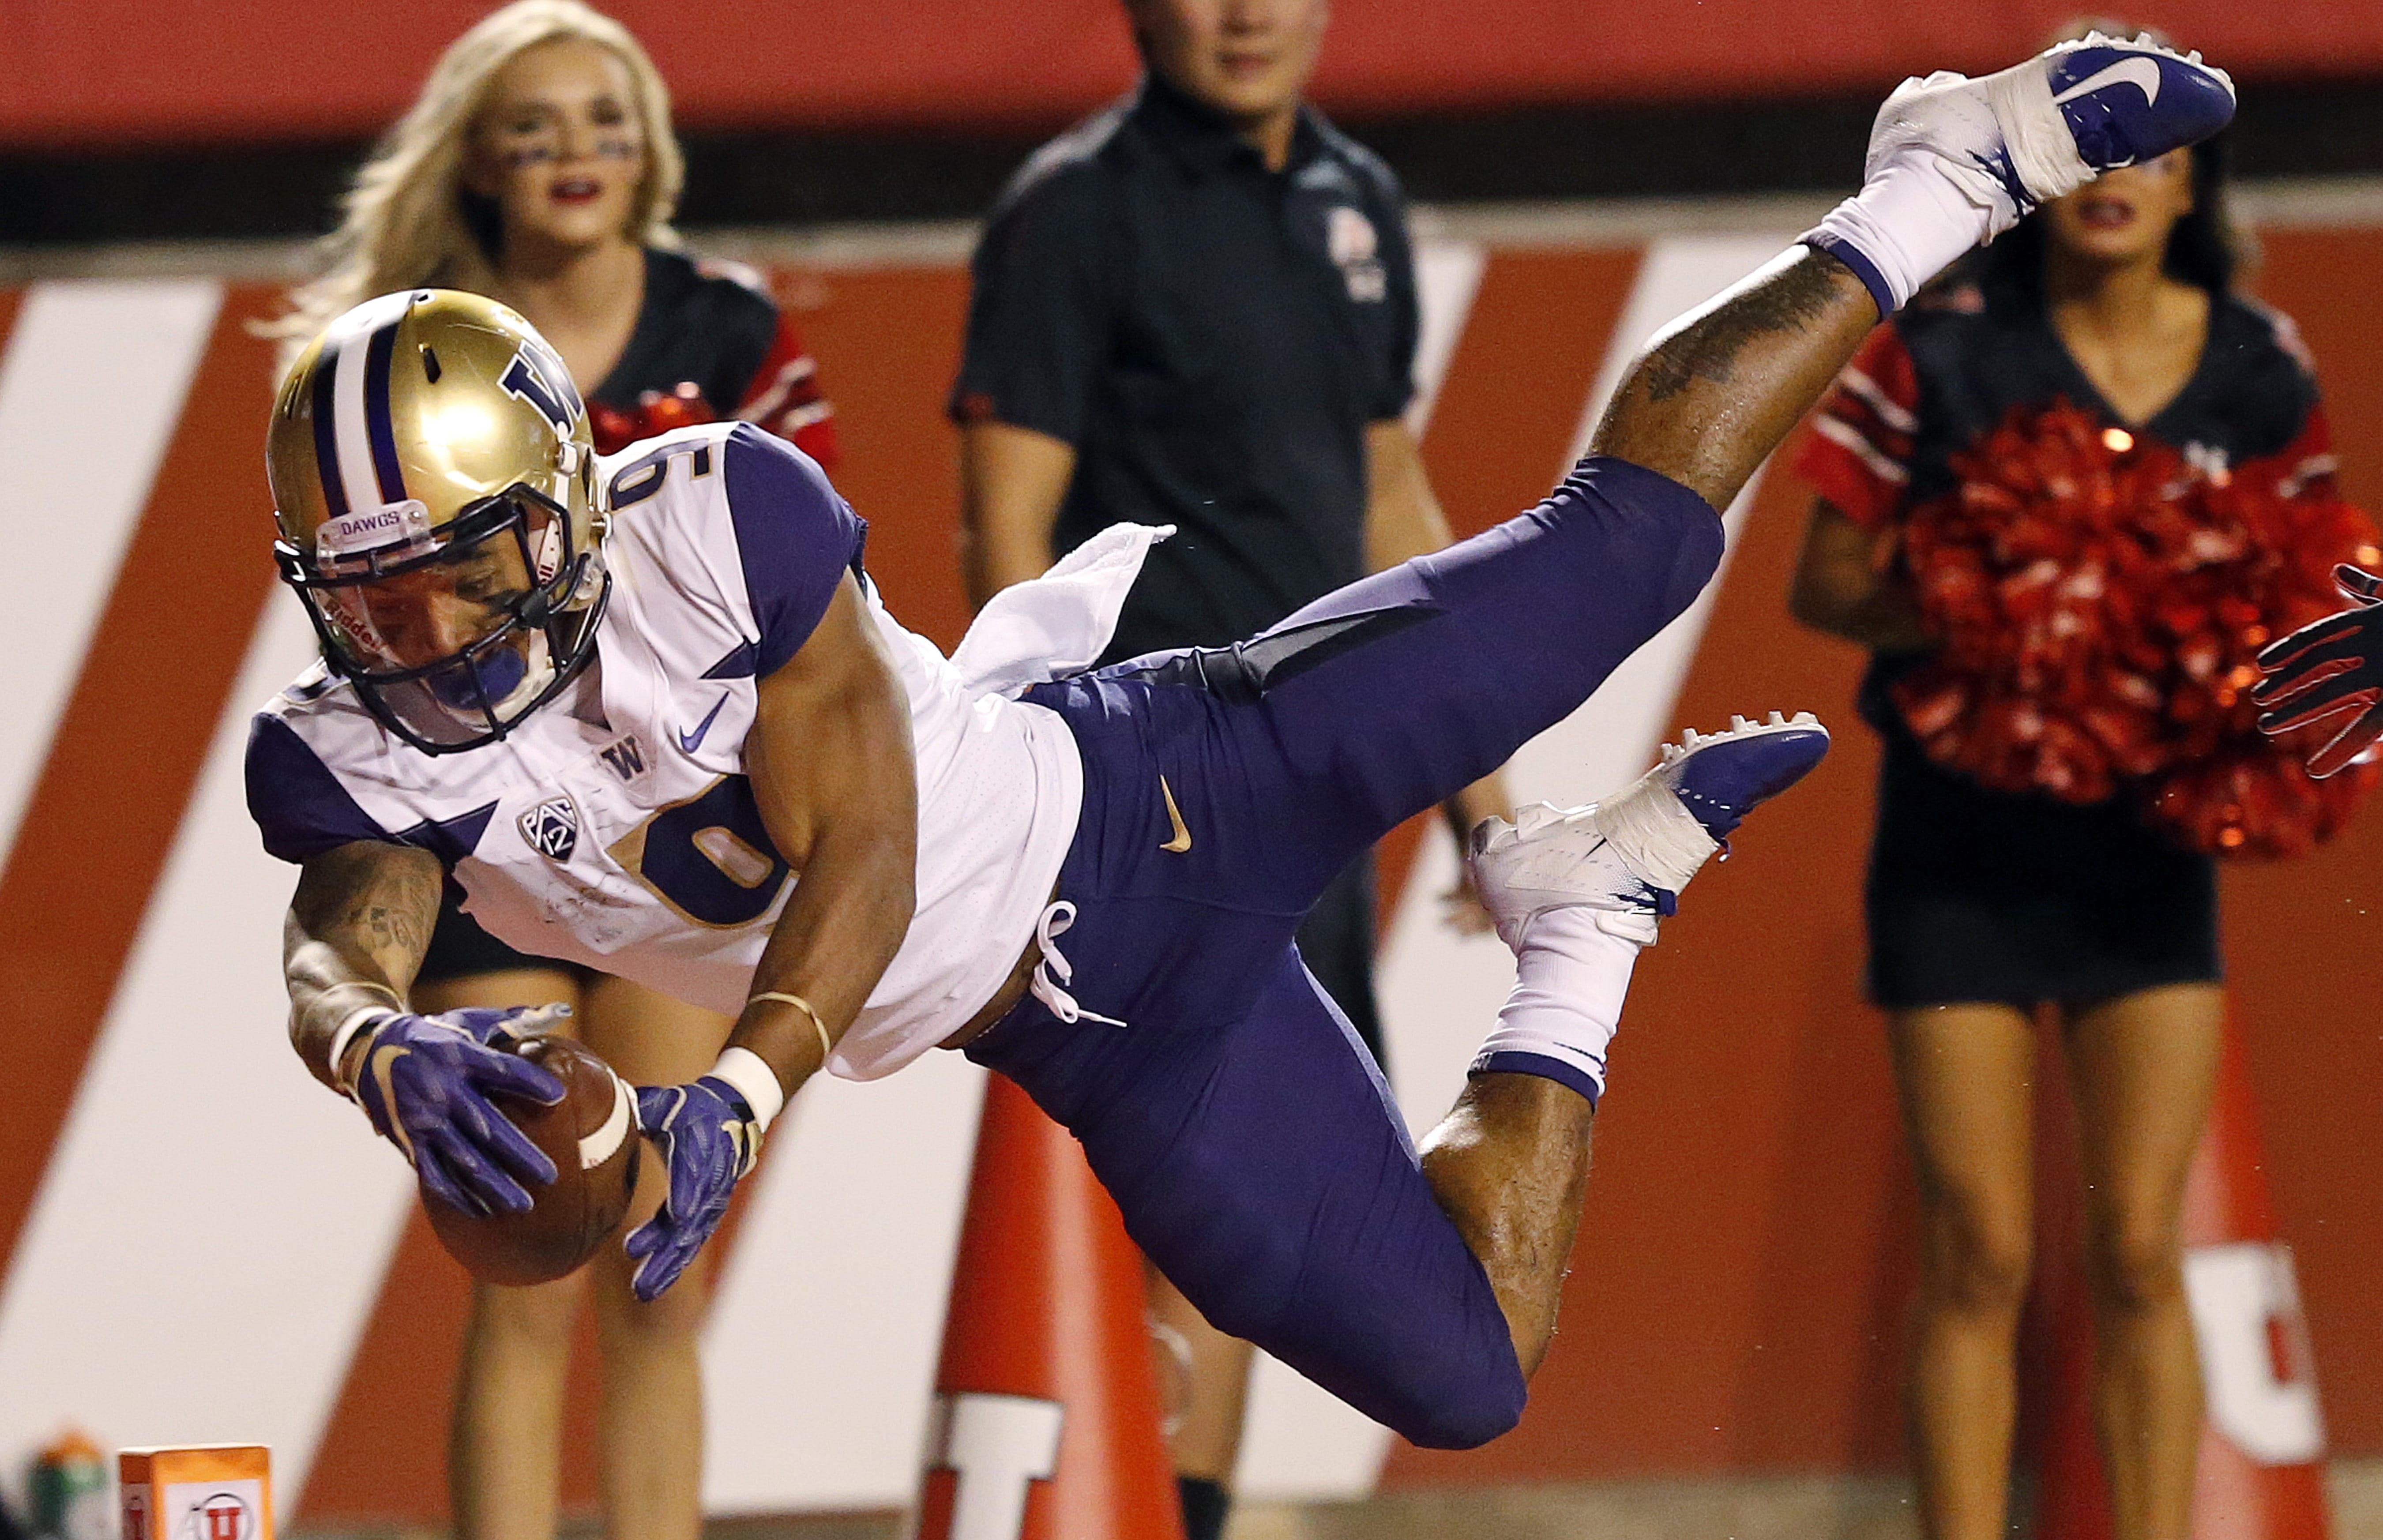 Washington running back Myles Gaskin (9) scores against Utah in the first half during an NCAA college football game Saturday, Sept. 15, 2018, in Salt Lake City.